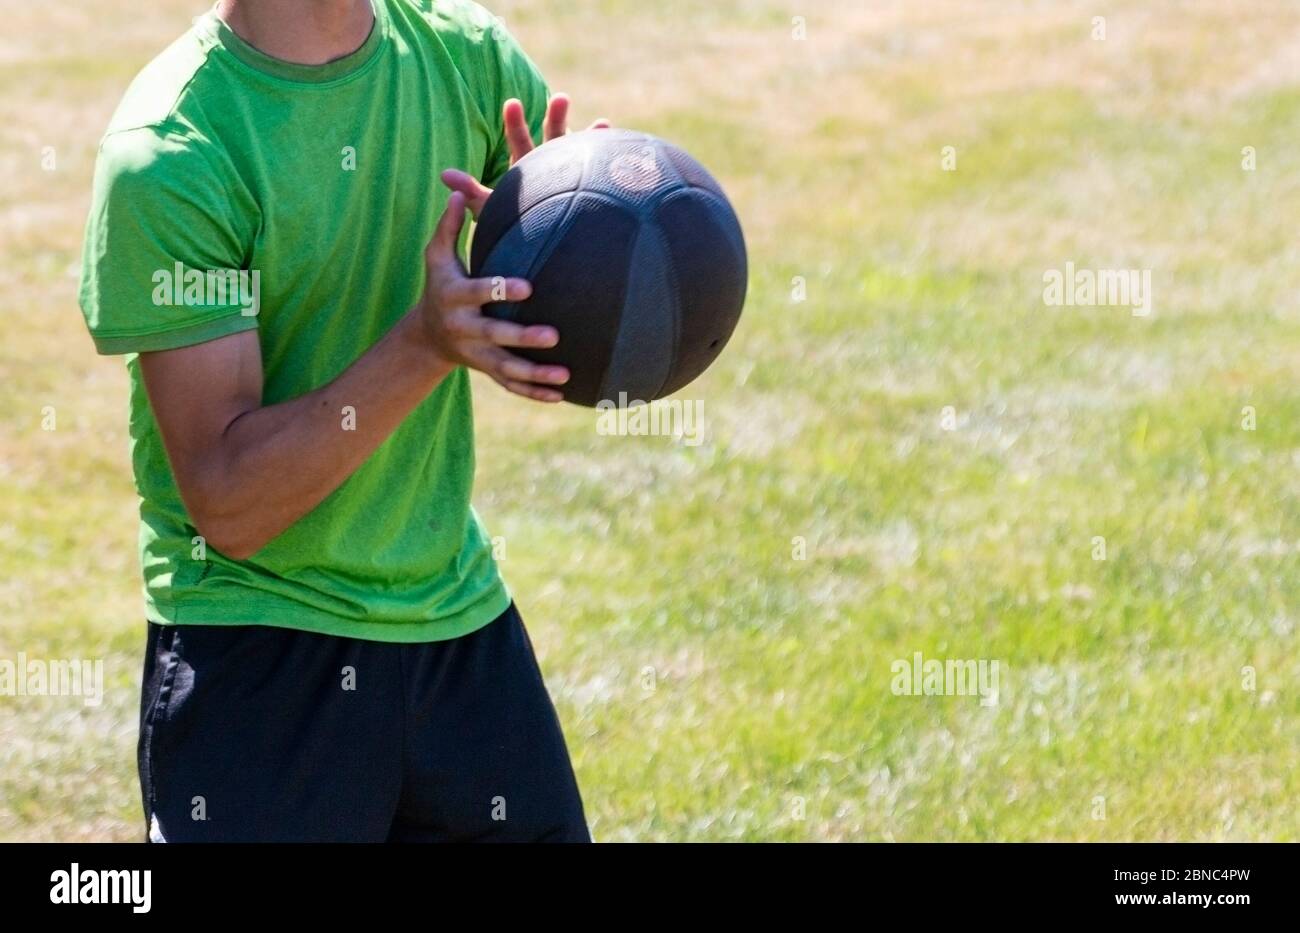 A young athlete is catching a medicine ball during strength training on a green grass field during summer camp. Stock Photo